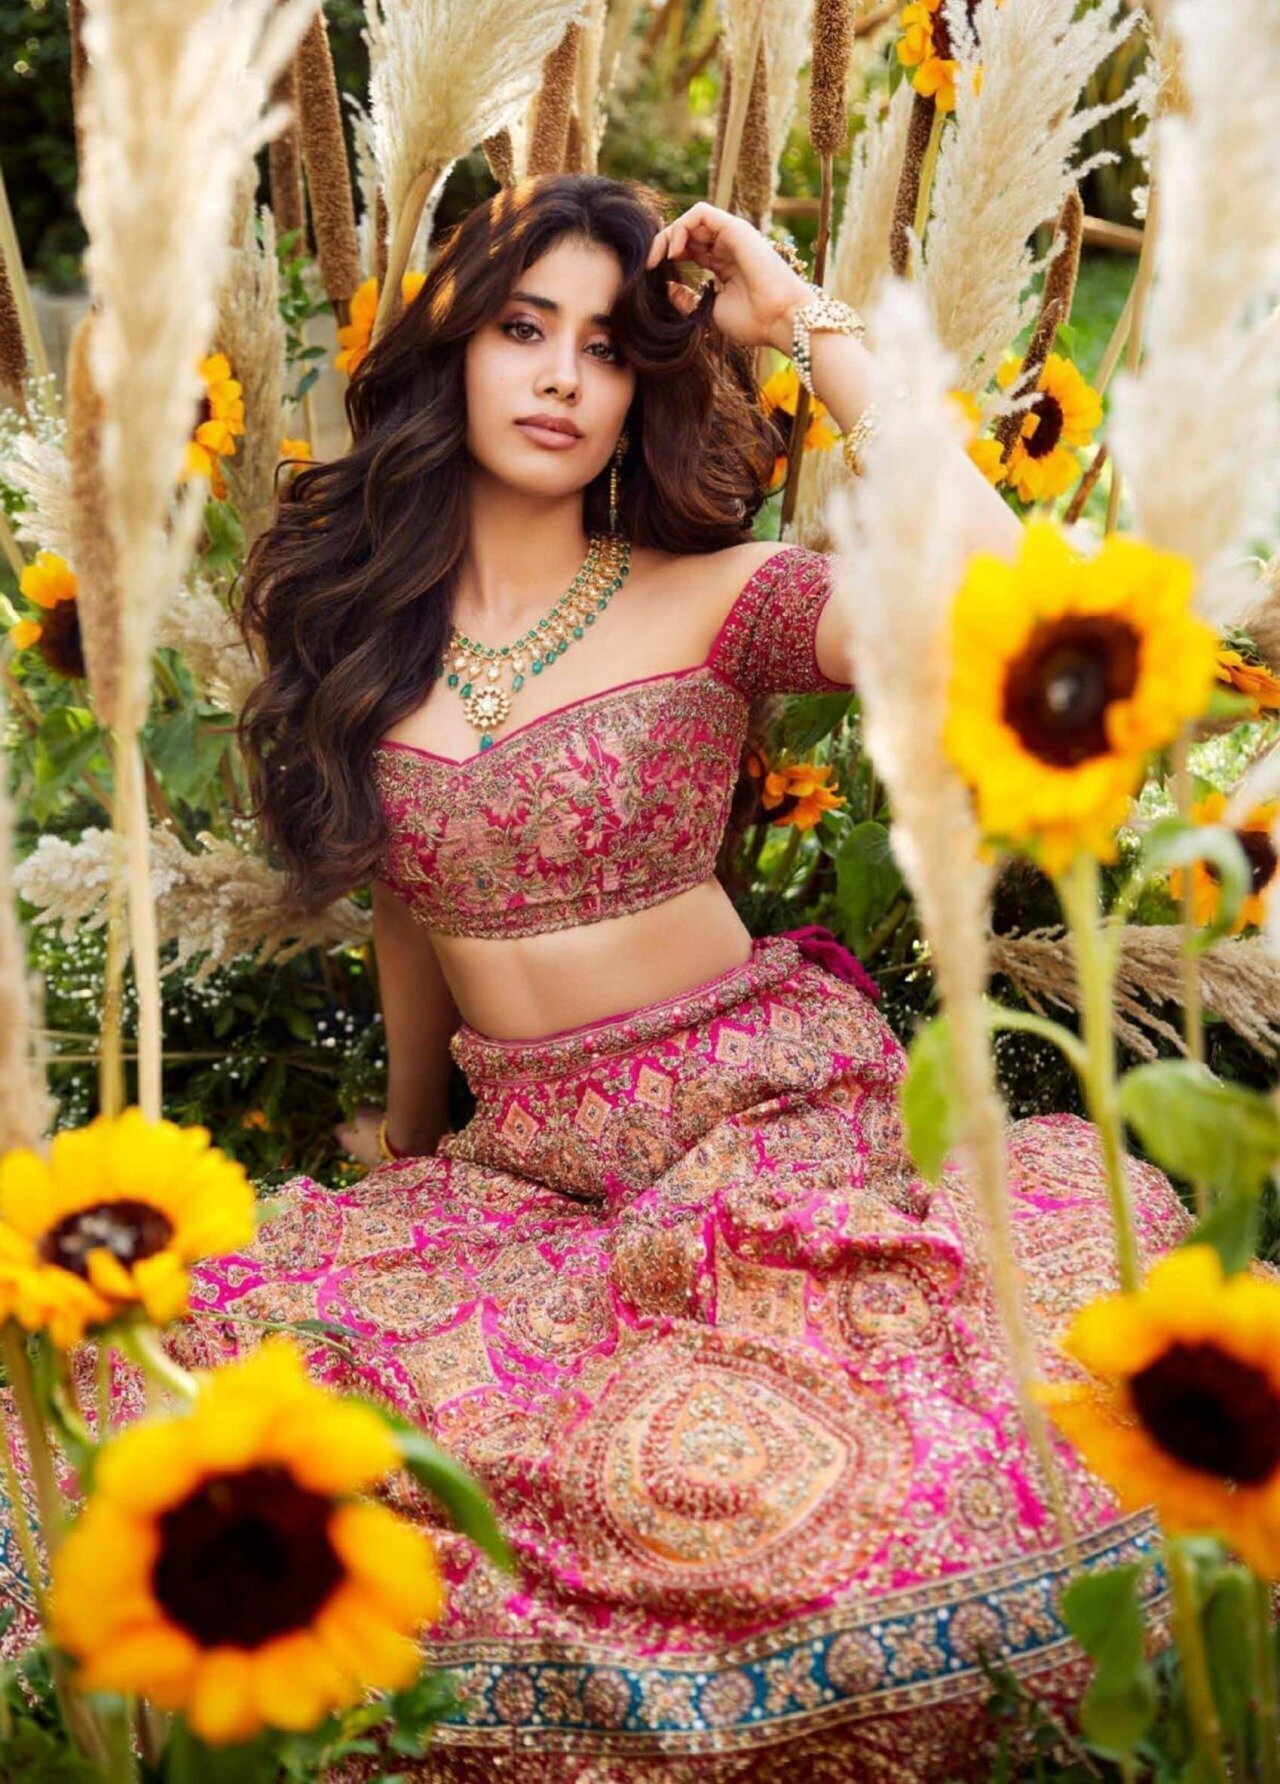 Janvhi Kapoor For Brides Today India 2020 Photoshoot | Picture 1767342